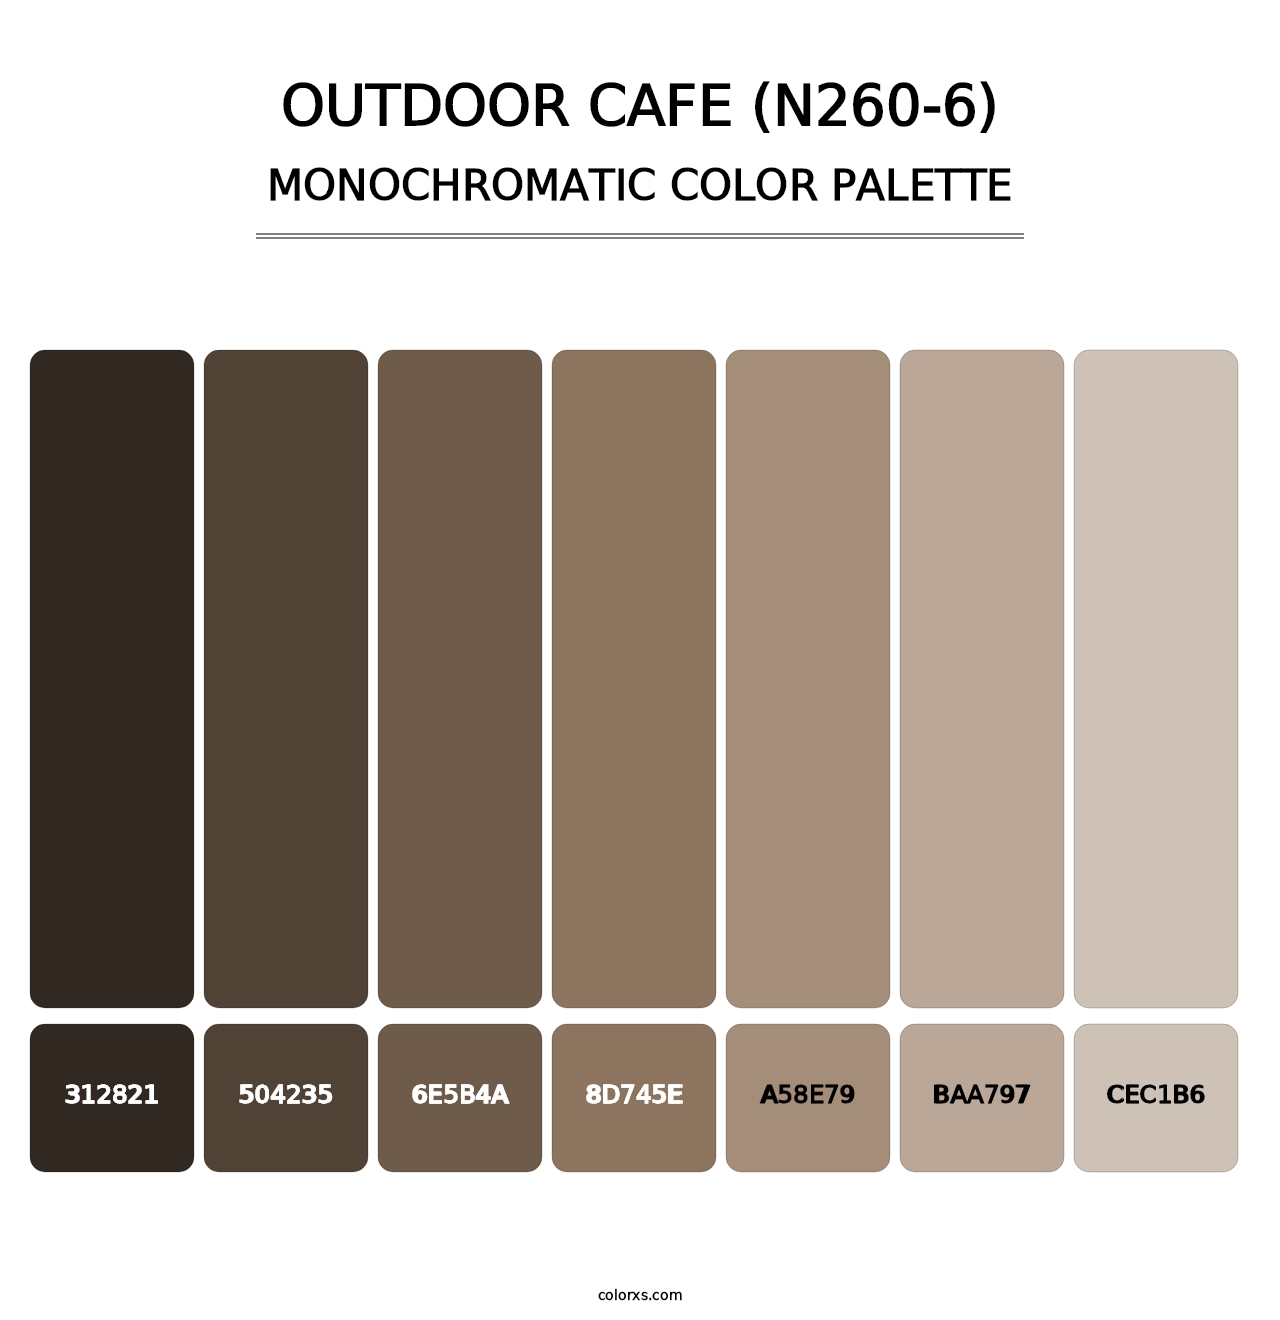 Outdoor Cafe (N260-6) - Monochromatic Color Palette